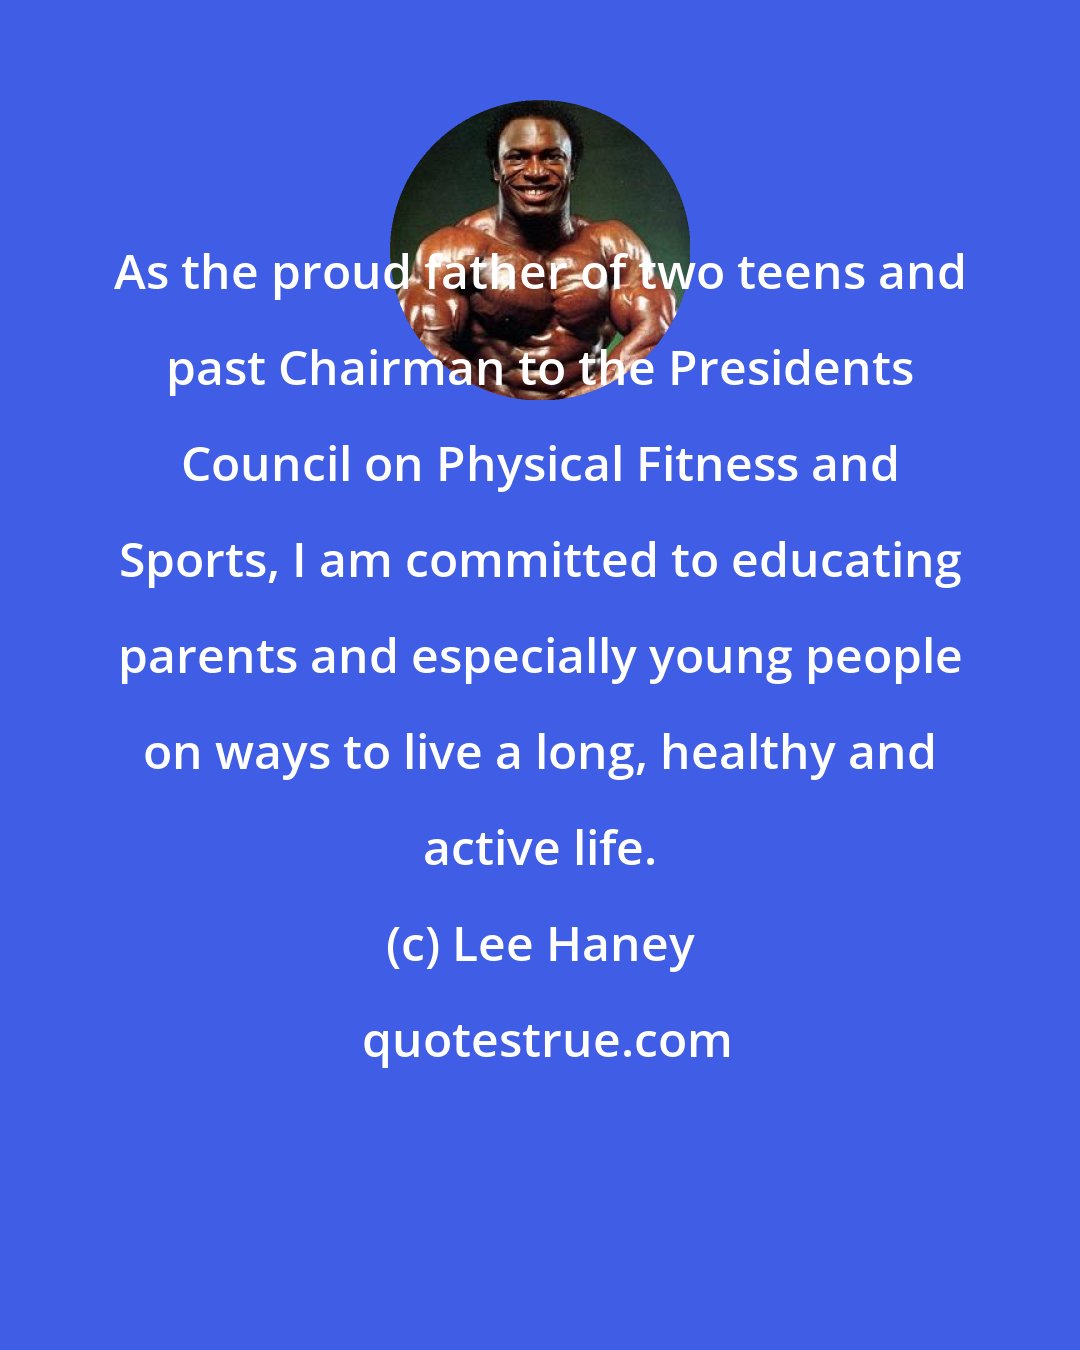 Lee Haney: As the proud father of two teens and past Chairman to the Presidents Council on Physical Fitness and Sports, I am committed to educating parents and especially young people on ways to live a long, healthy and active life.